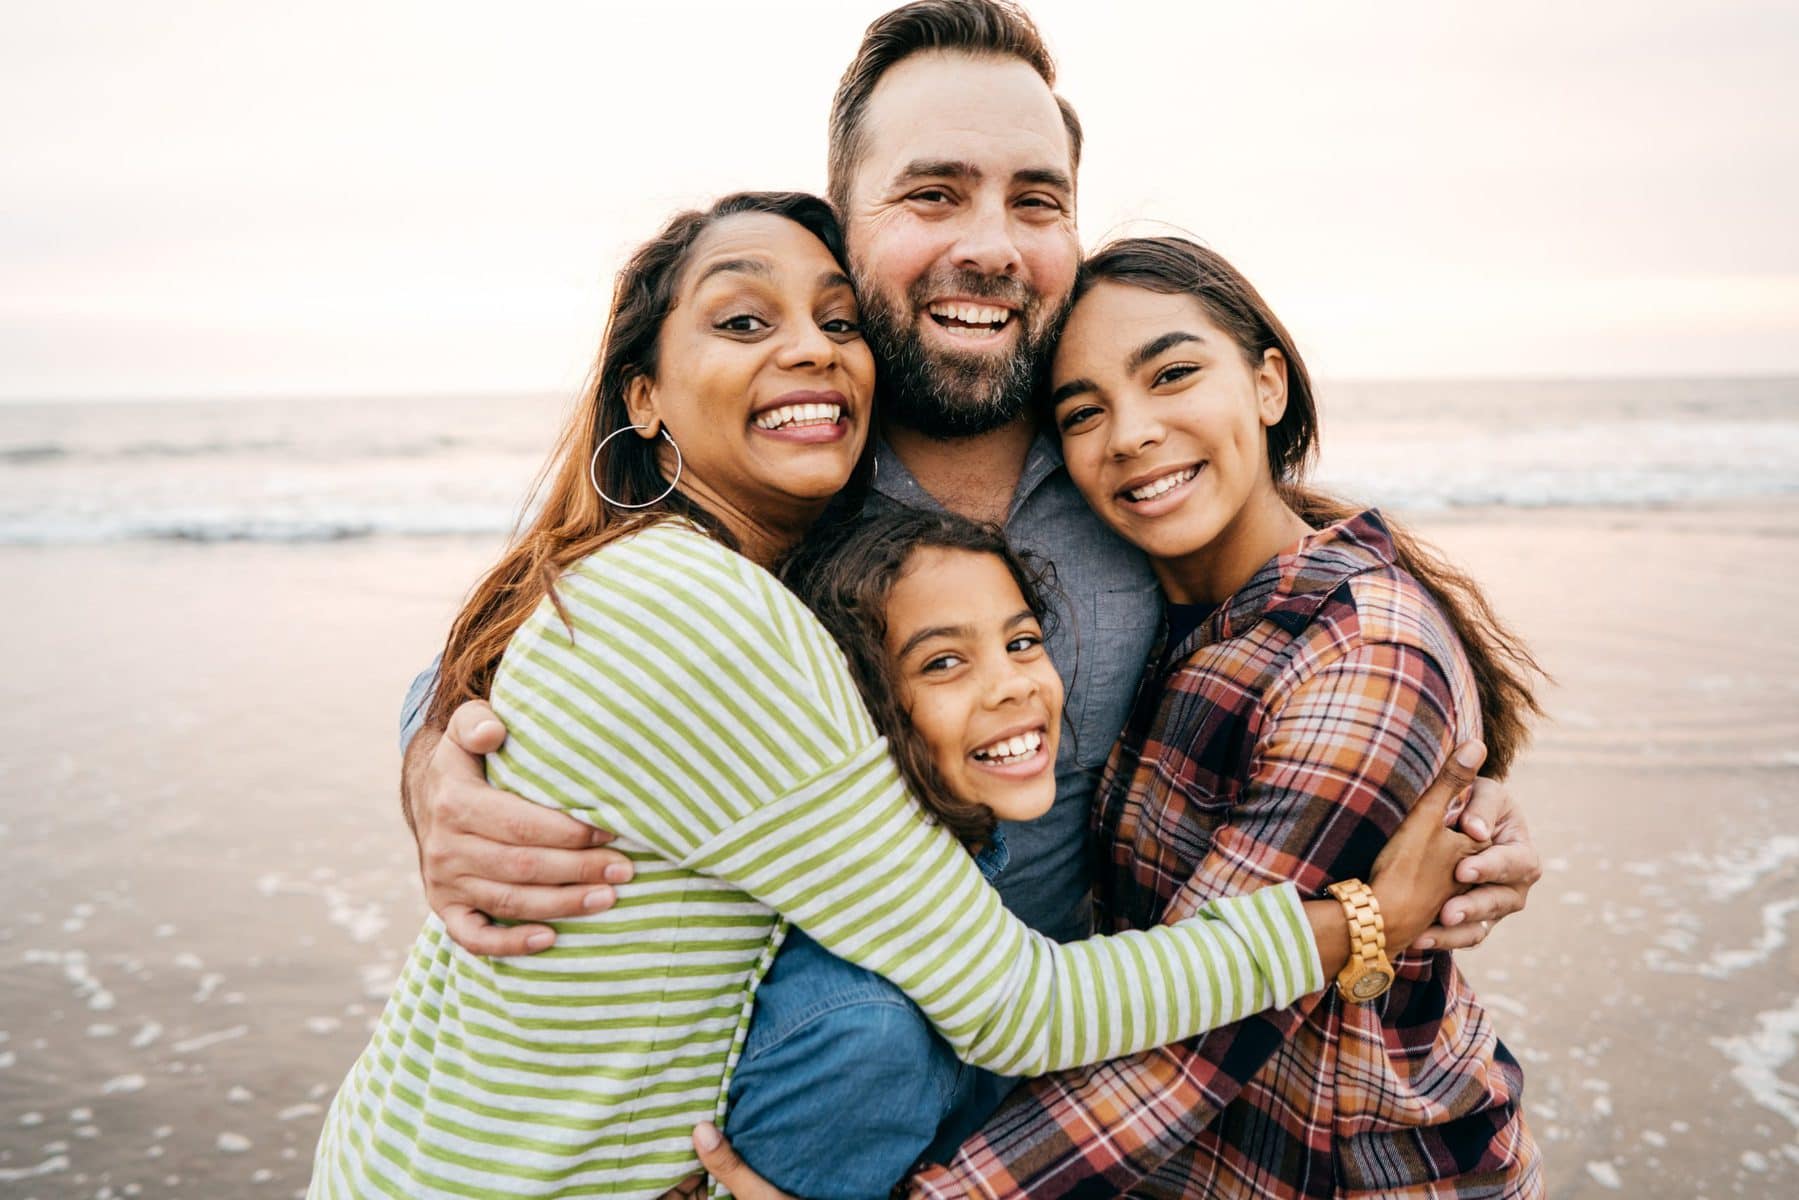 A missionary family of 4 in a group hug by the beach